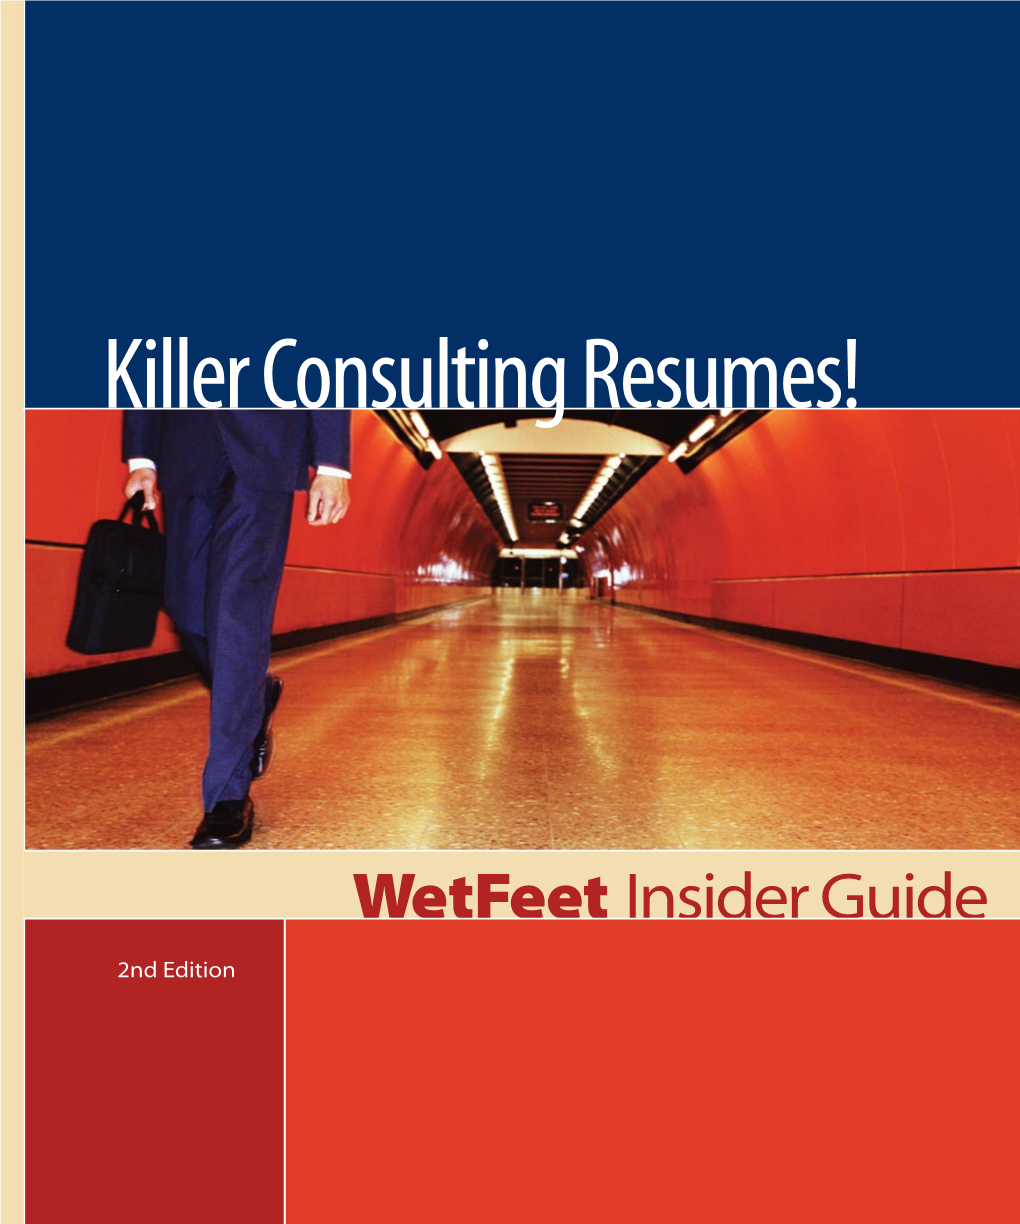 Killer Consulting Resumes!